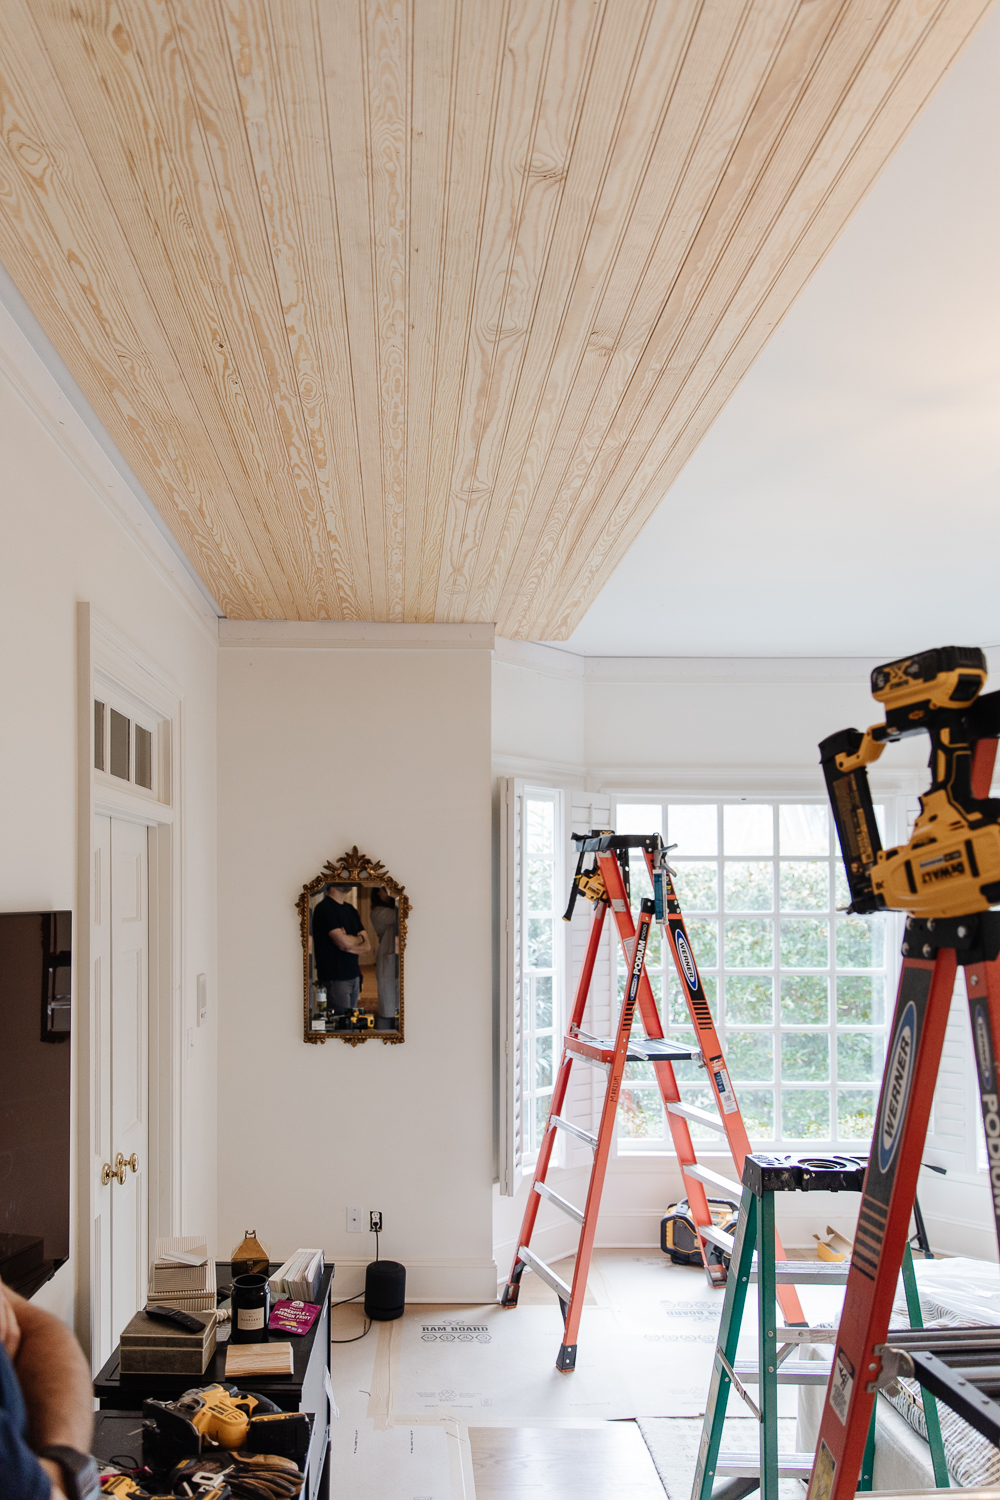 We added Beadboard to our Bedroom Ceiling! (Here's how!) - Chris Loves Julia